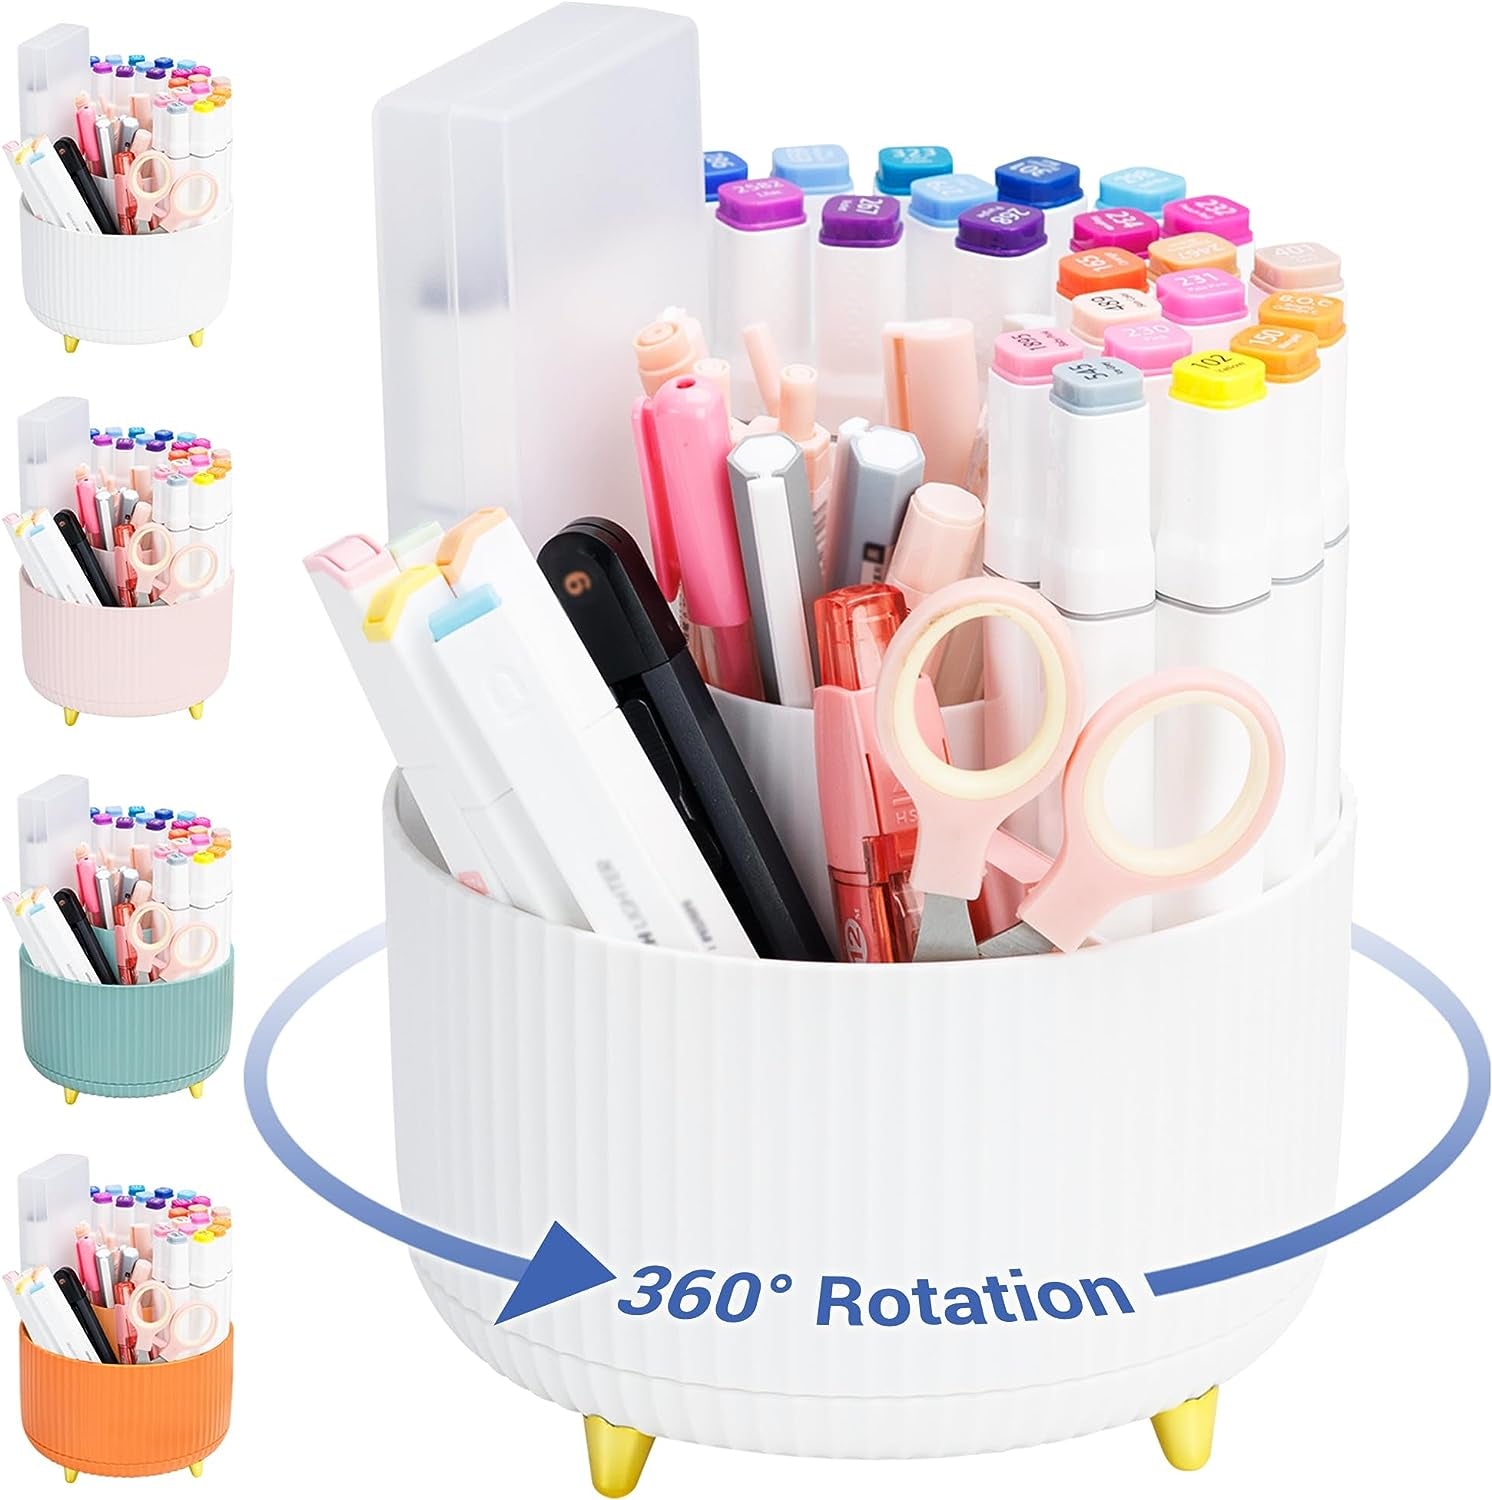 Pen Holder for Desk - Pencil Holder with 5 Compartments, 360°Rotating Desk Organizers and Accessories for Women and Men,Desk Caddy for School,Teacher,Office,Art Supply. Tidy Desk, Tidy Mind